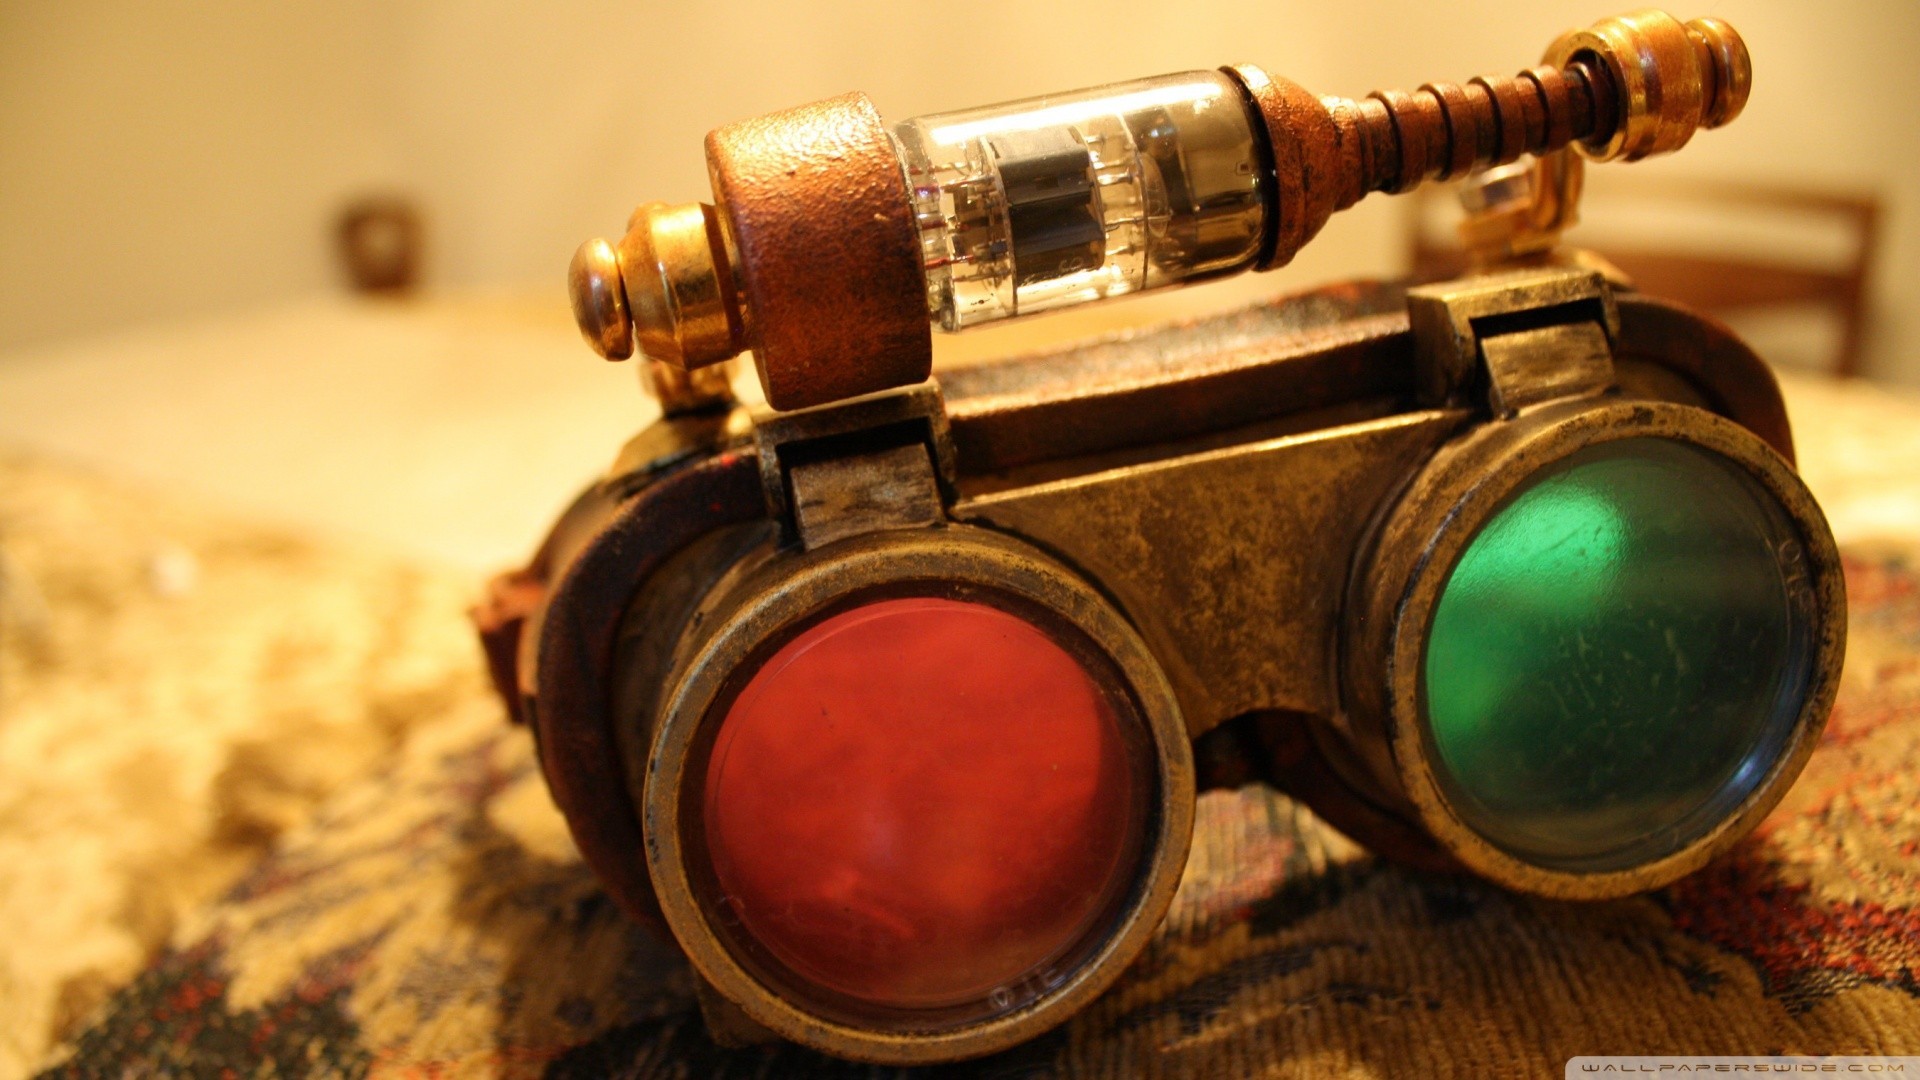 General 1920x1080 steampunk red green watermarked closeup